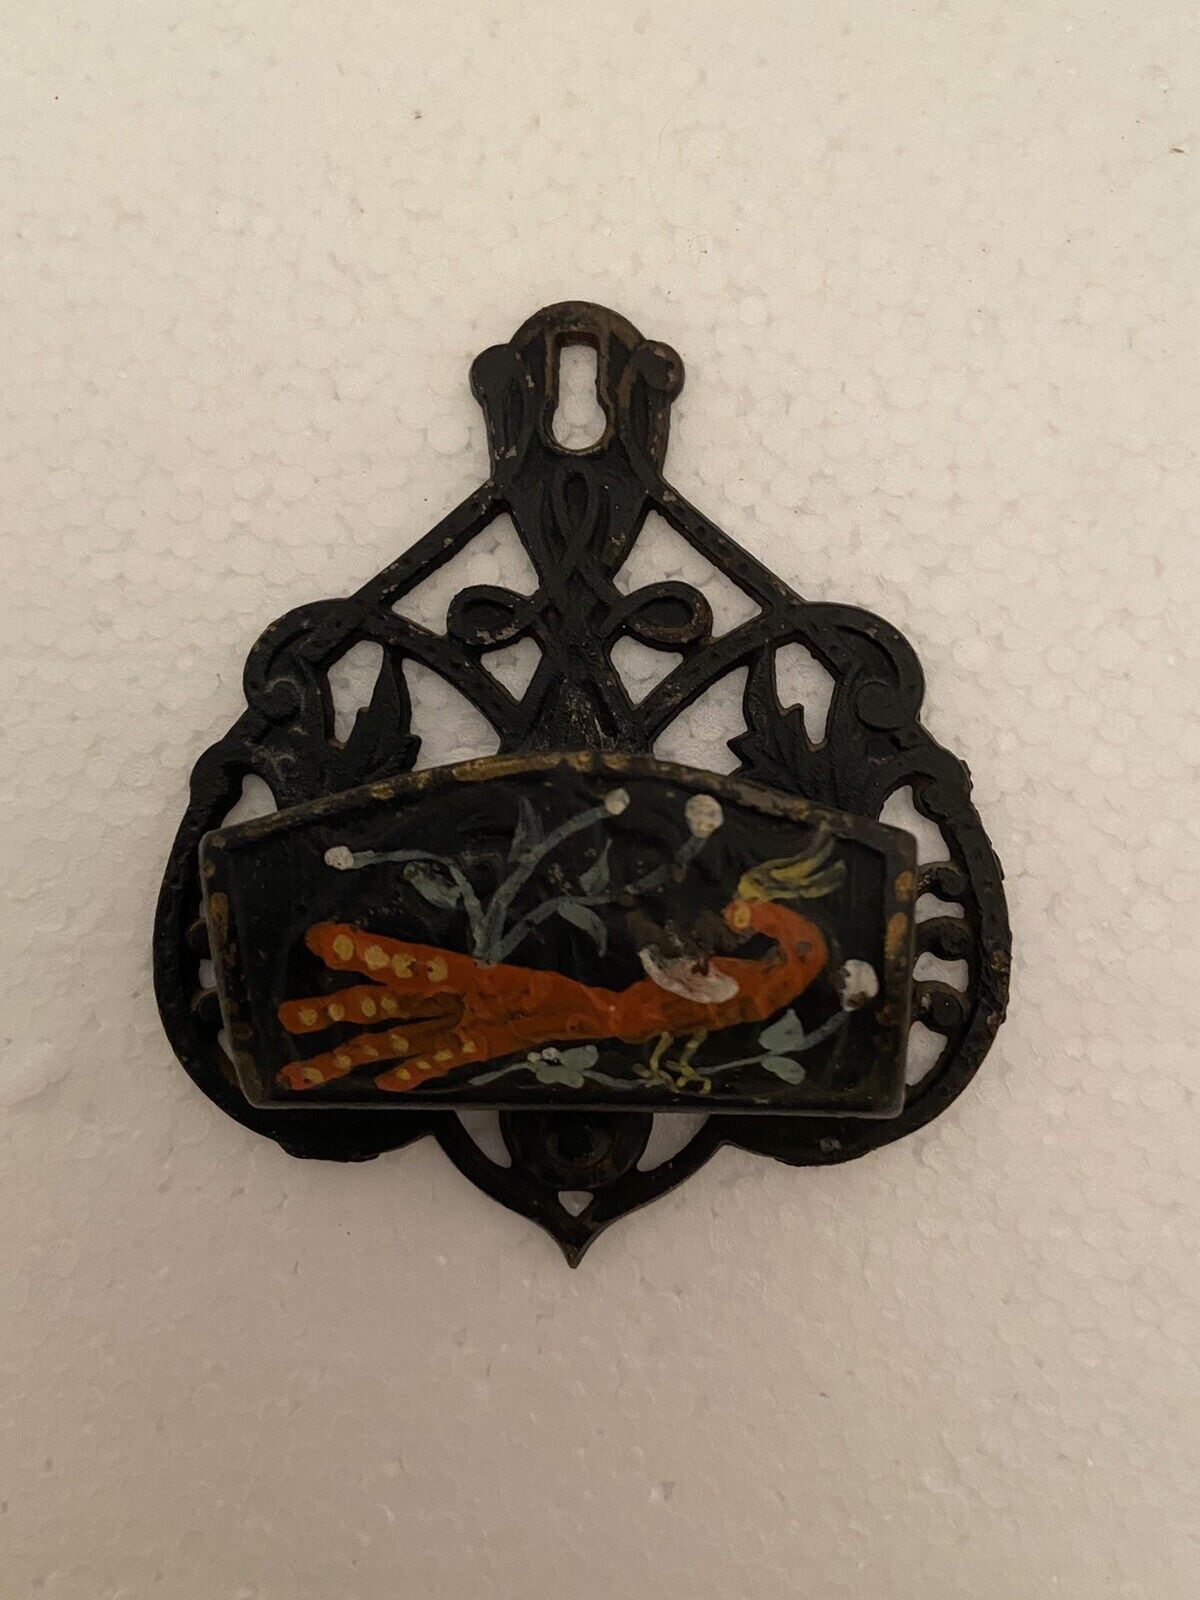 Antique Cast Iron Wall Mounted Match Holder Hand Painted Bird With Flowers